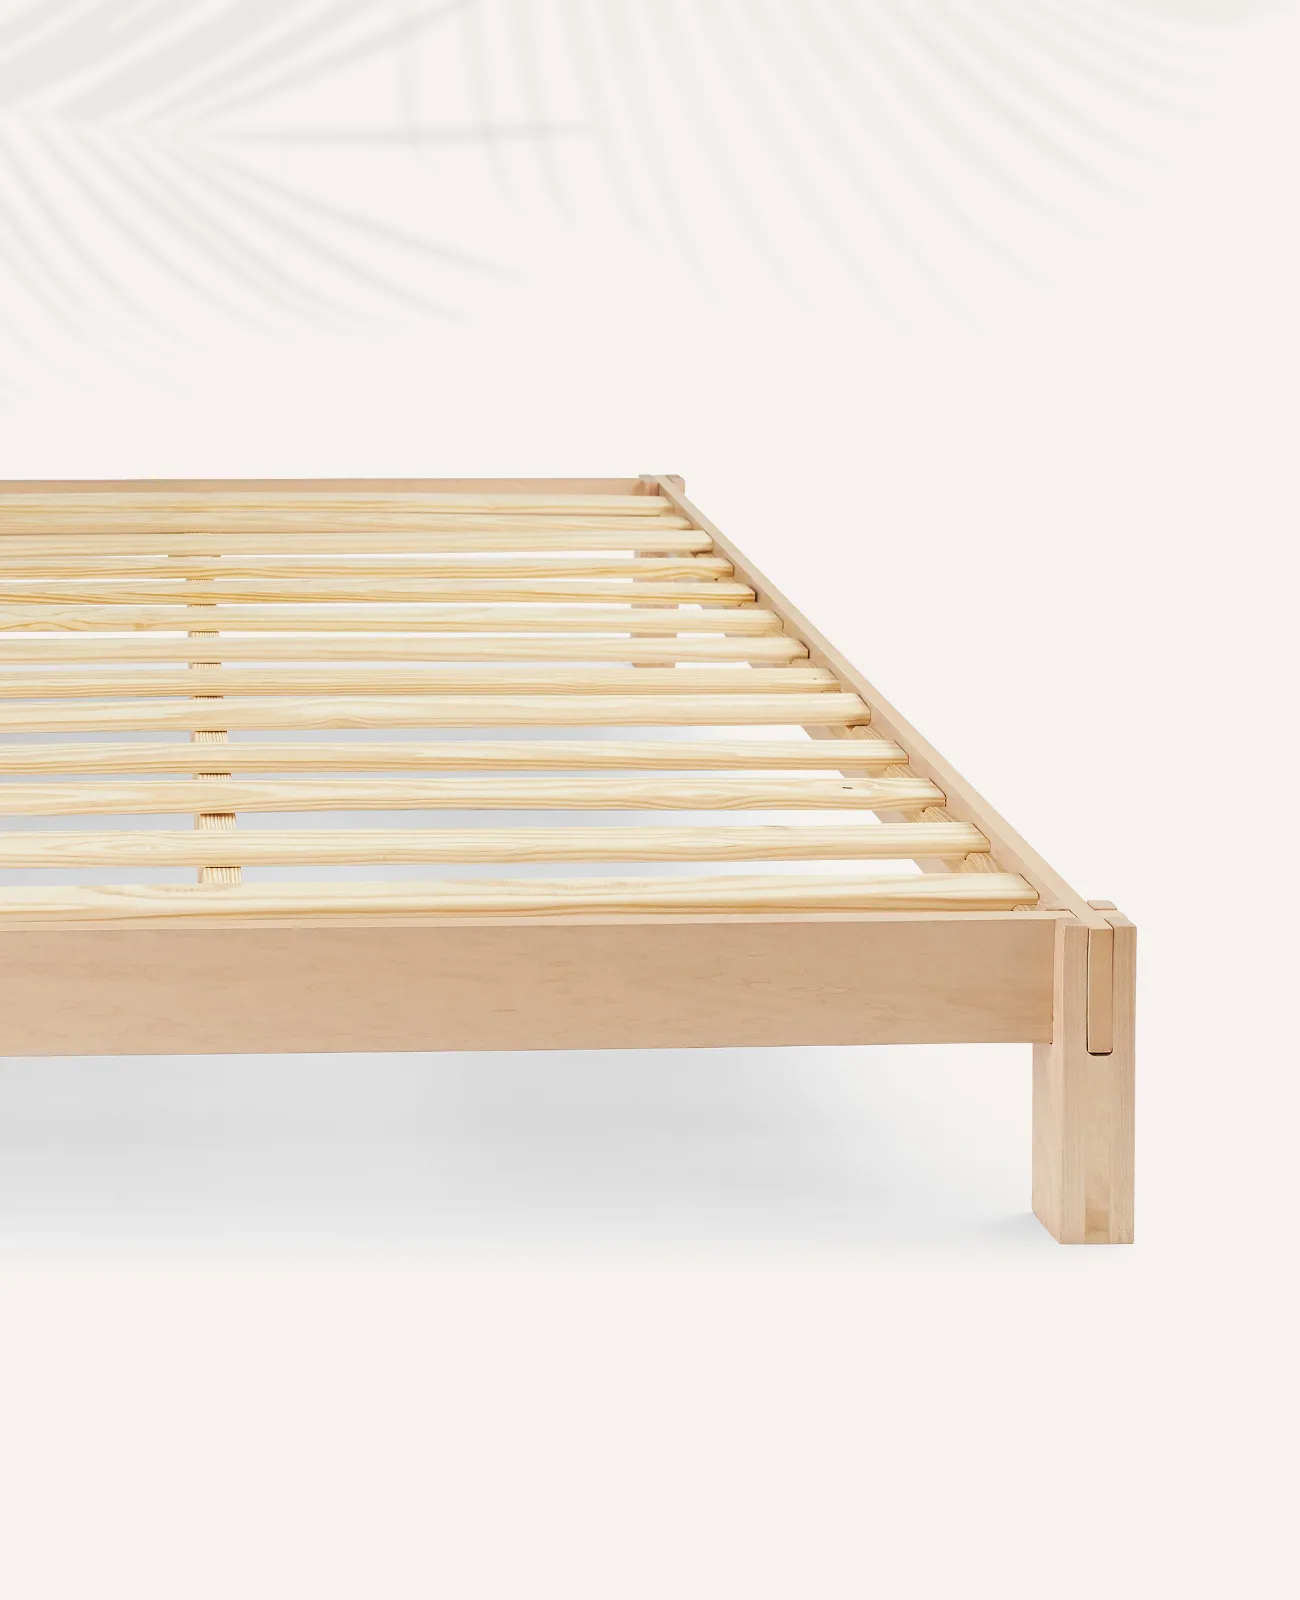 The Natural Wood Bed Frame by Birch